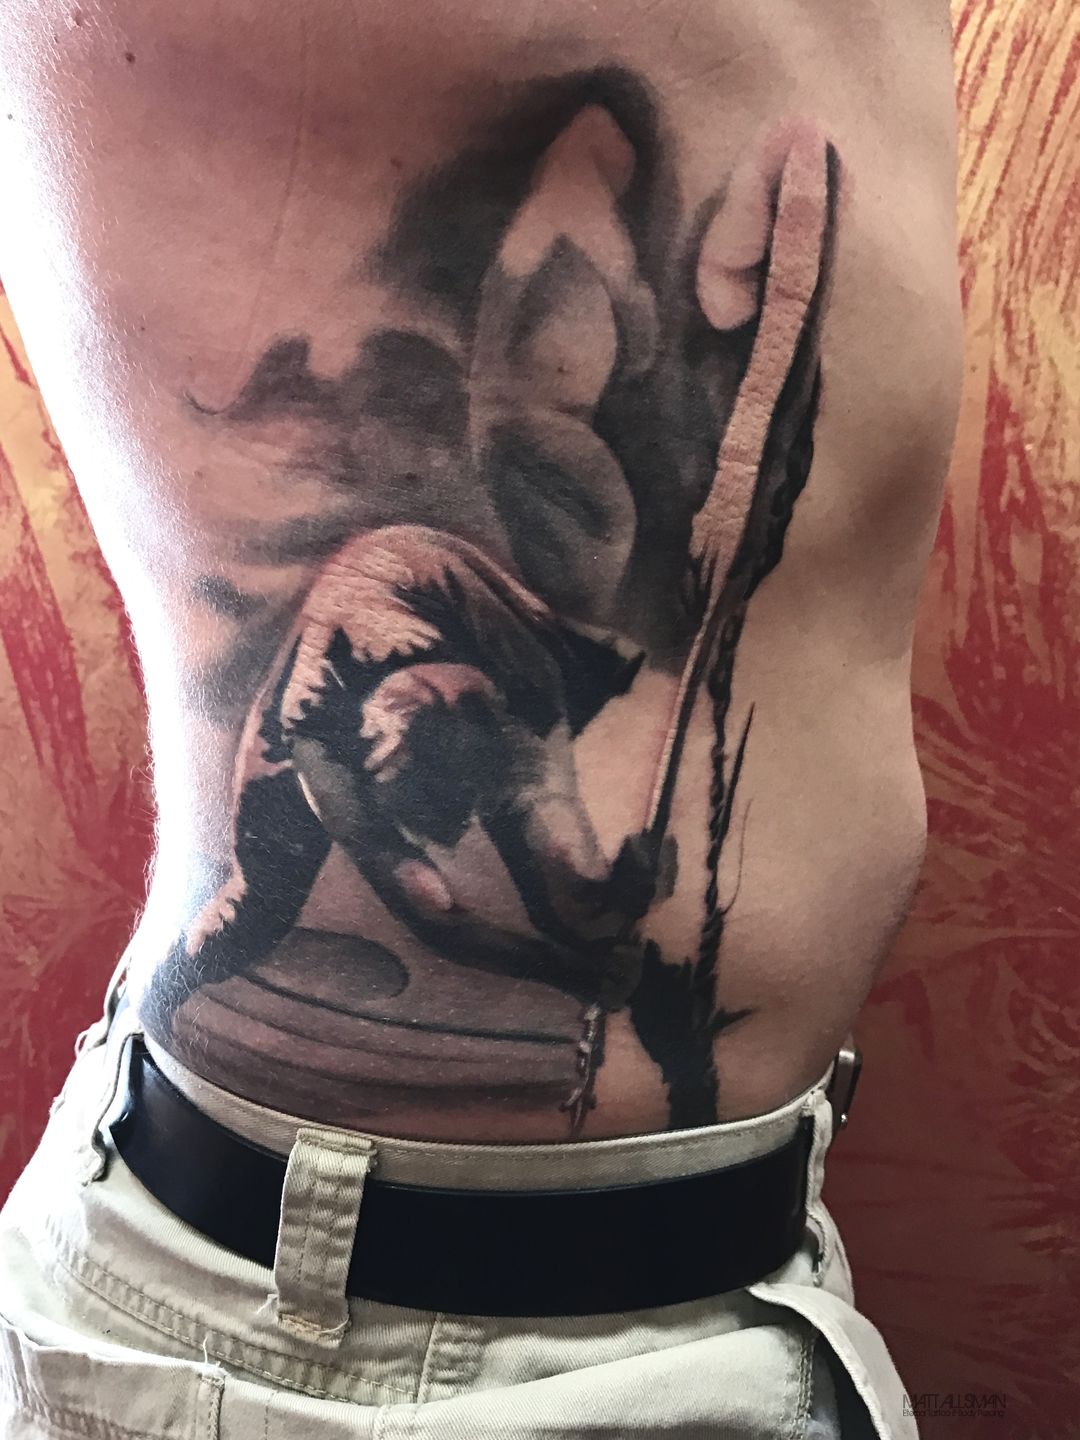 Figured my tattoo would be welcomed here  rtheclash